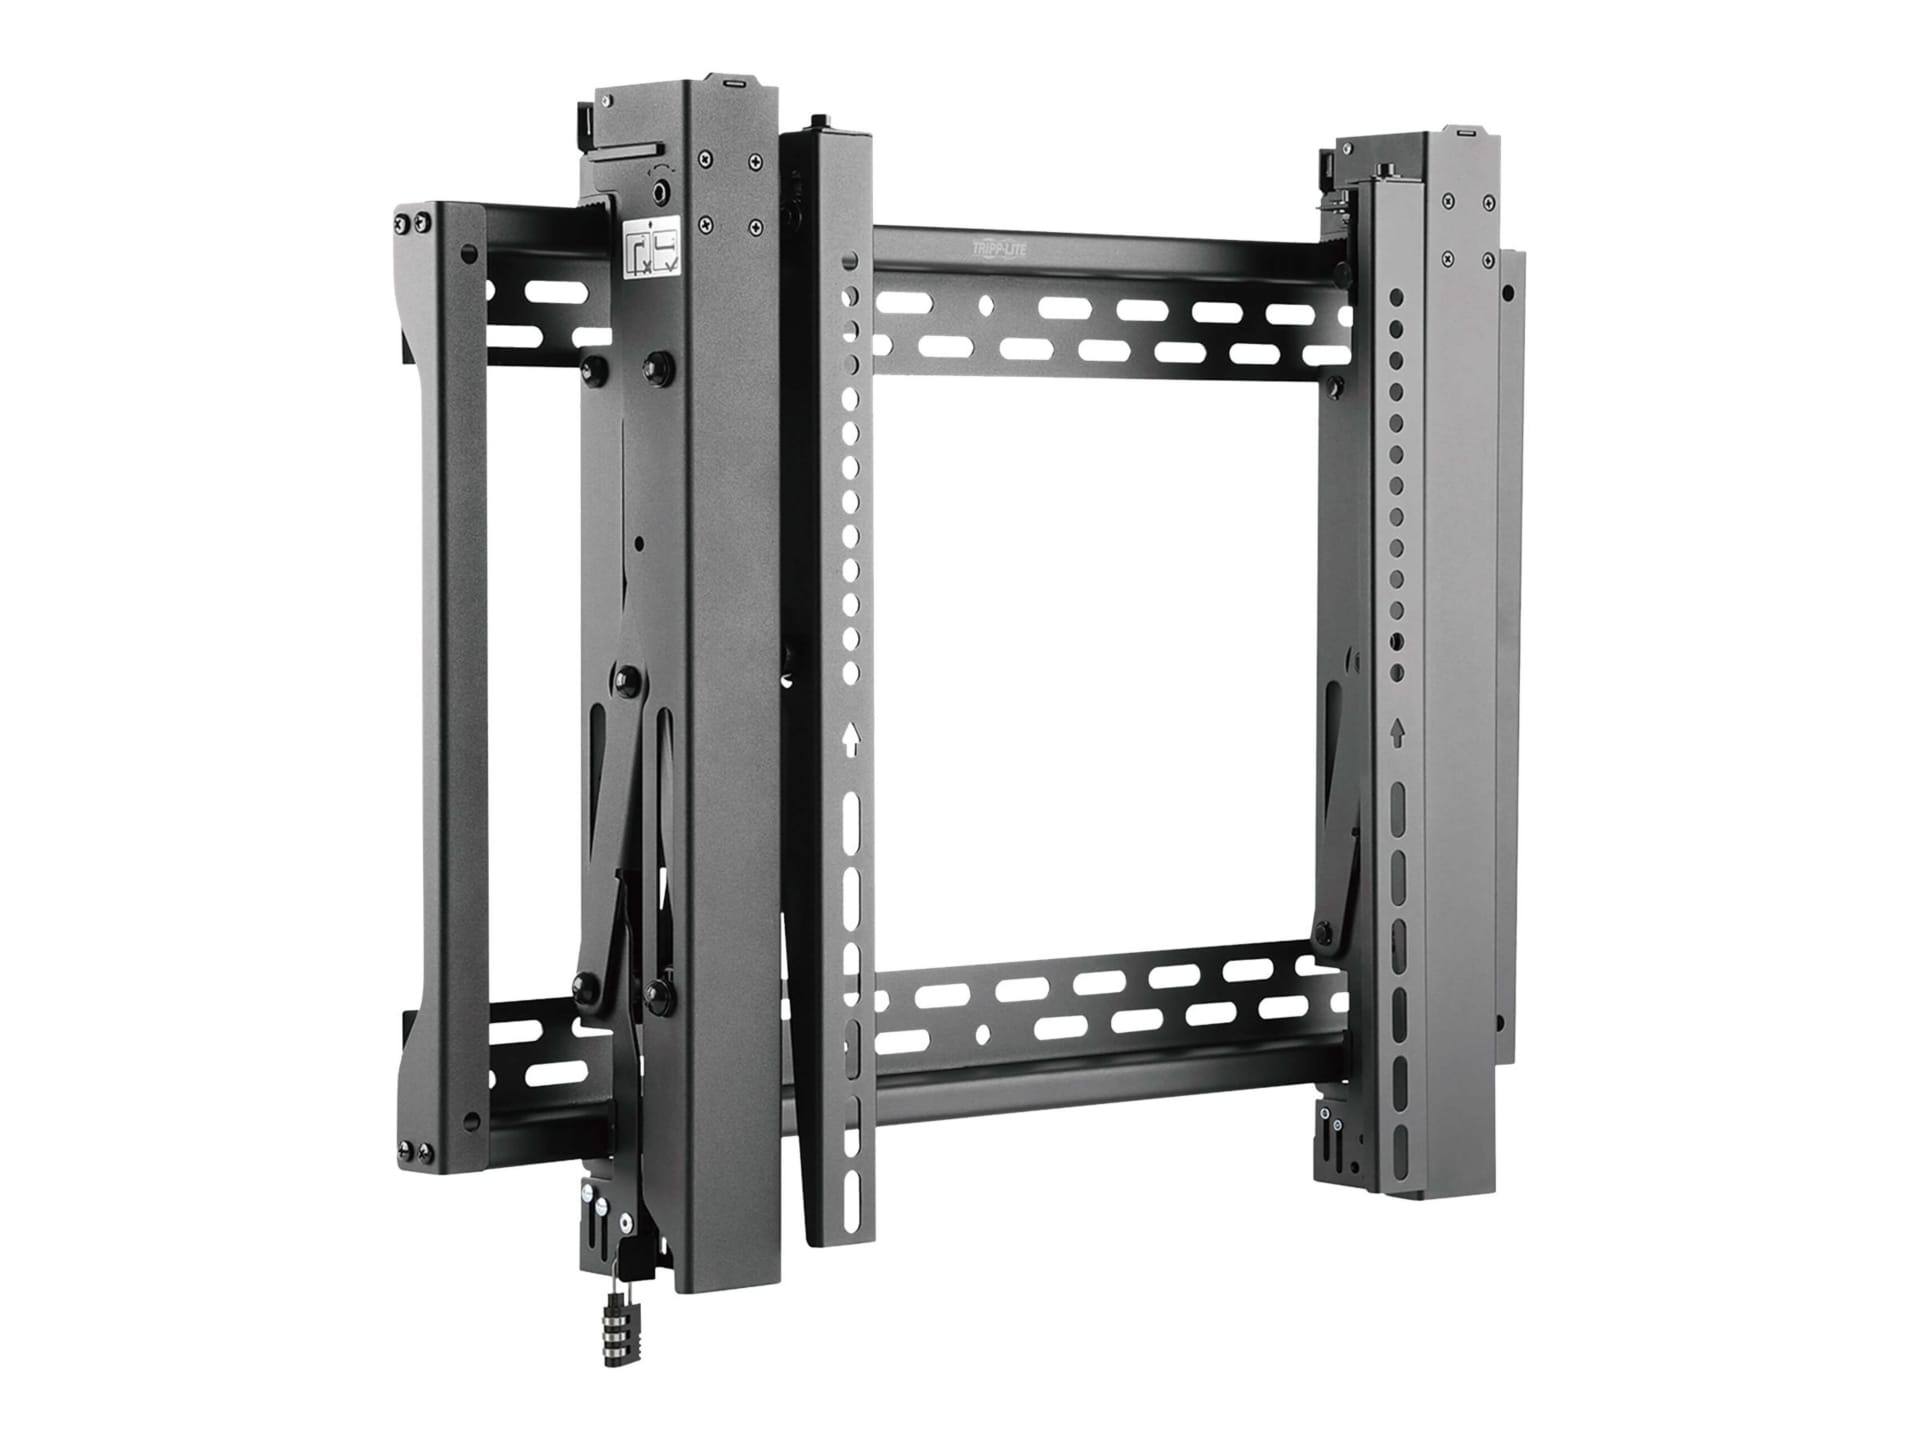 Tripp Lite Pop-Out Video Wall Mount w/Security for 45" to 70" TVs and Monitors - Flat Screens, UL Certified mounting kit